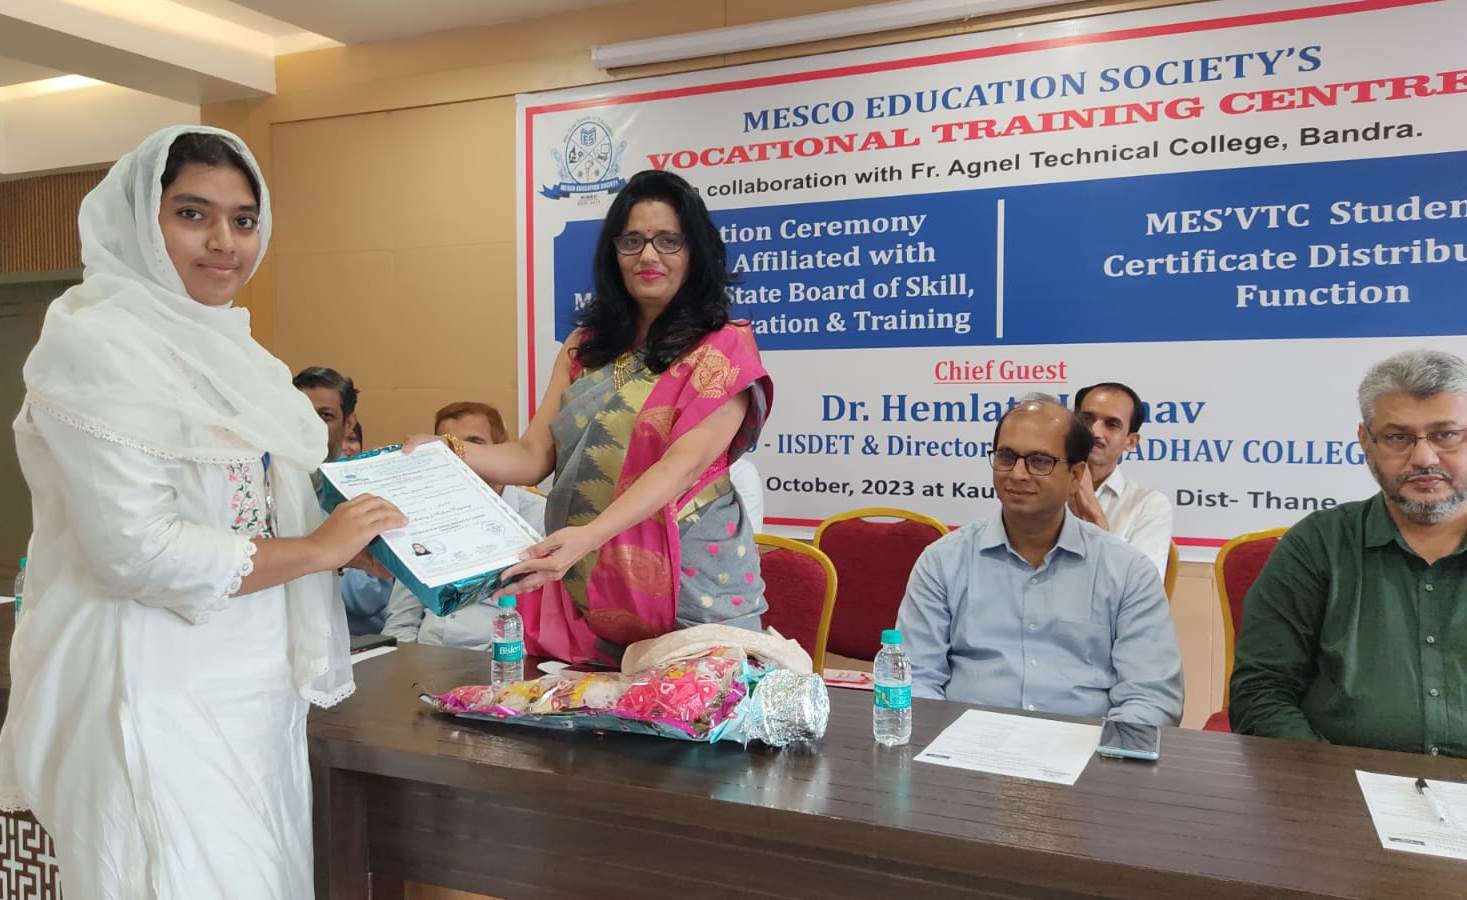 MESVTC Students' Felicitation Function and Inauguration of Courses under Affiliation with Maharashtra State Board of Skill, Vocational Education & Training